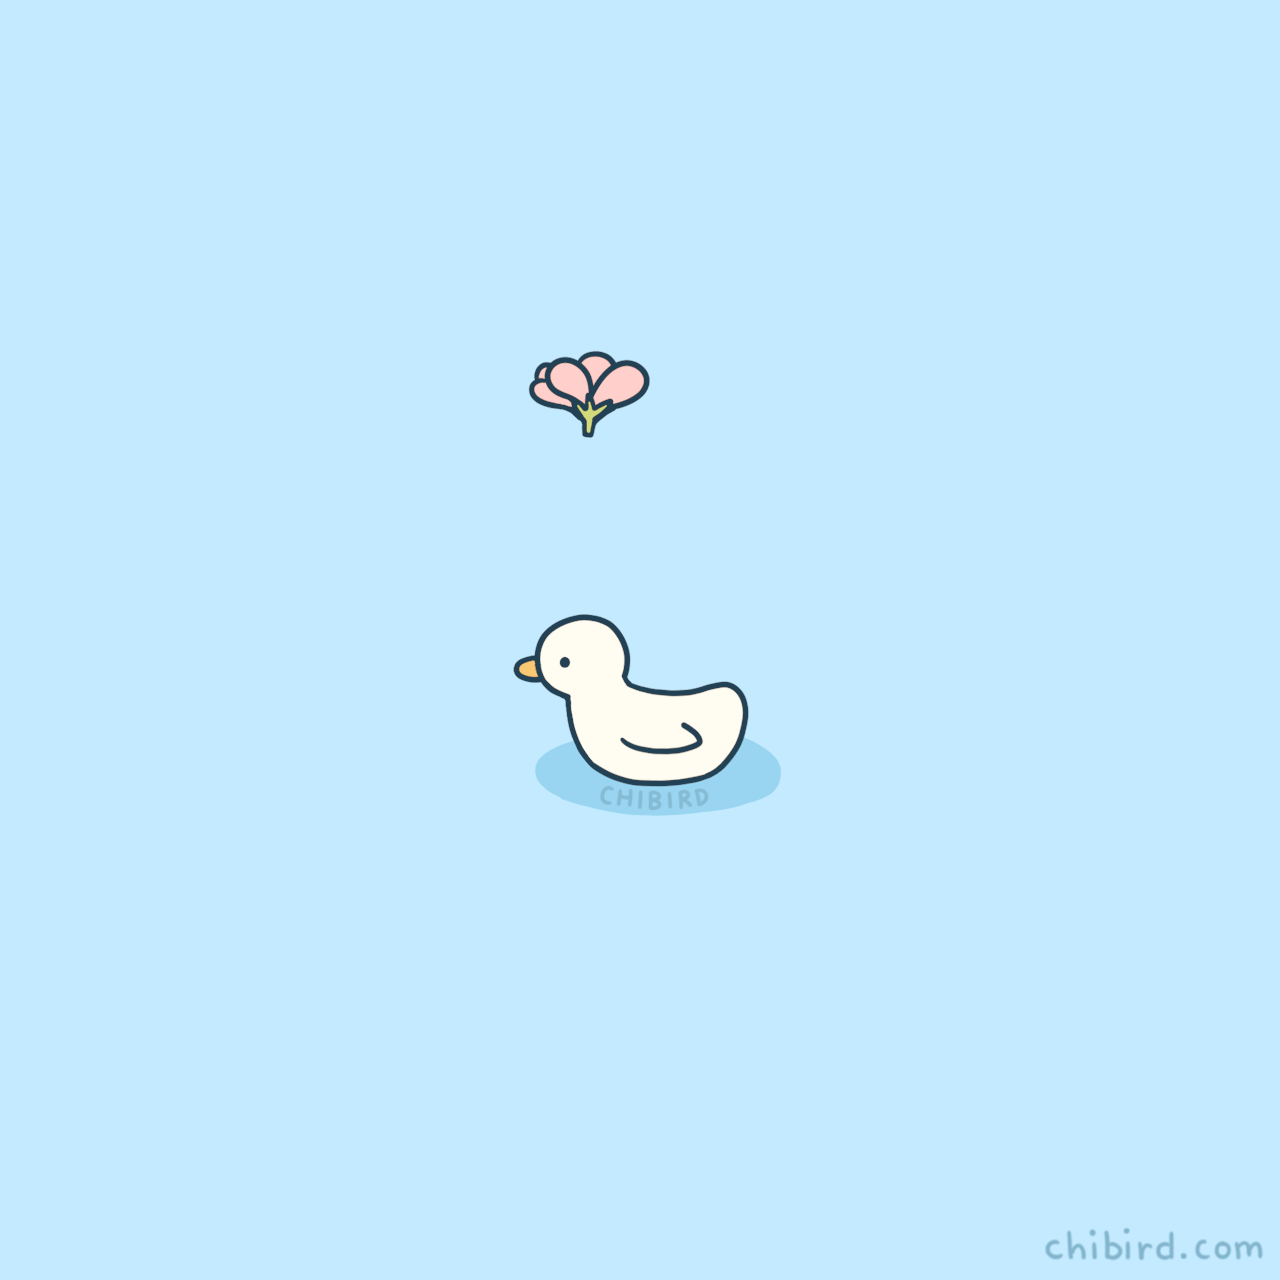 chibird — Flower-hat duck believes good things are coming...